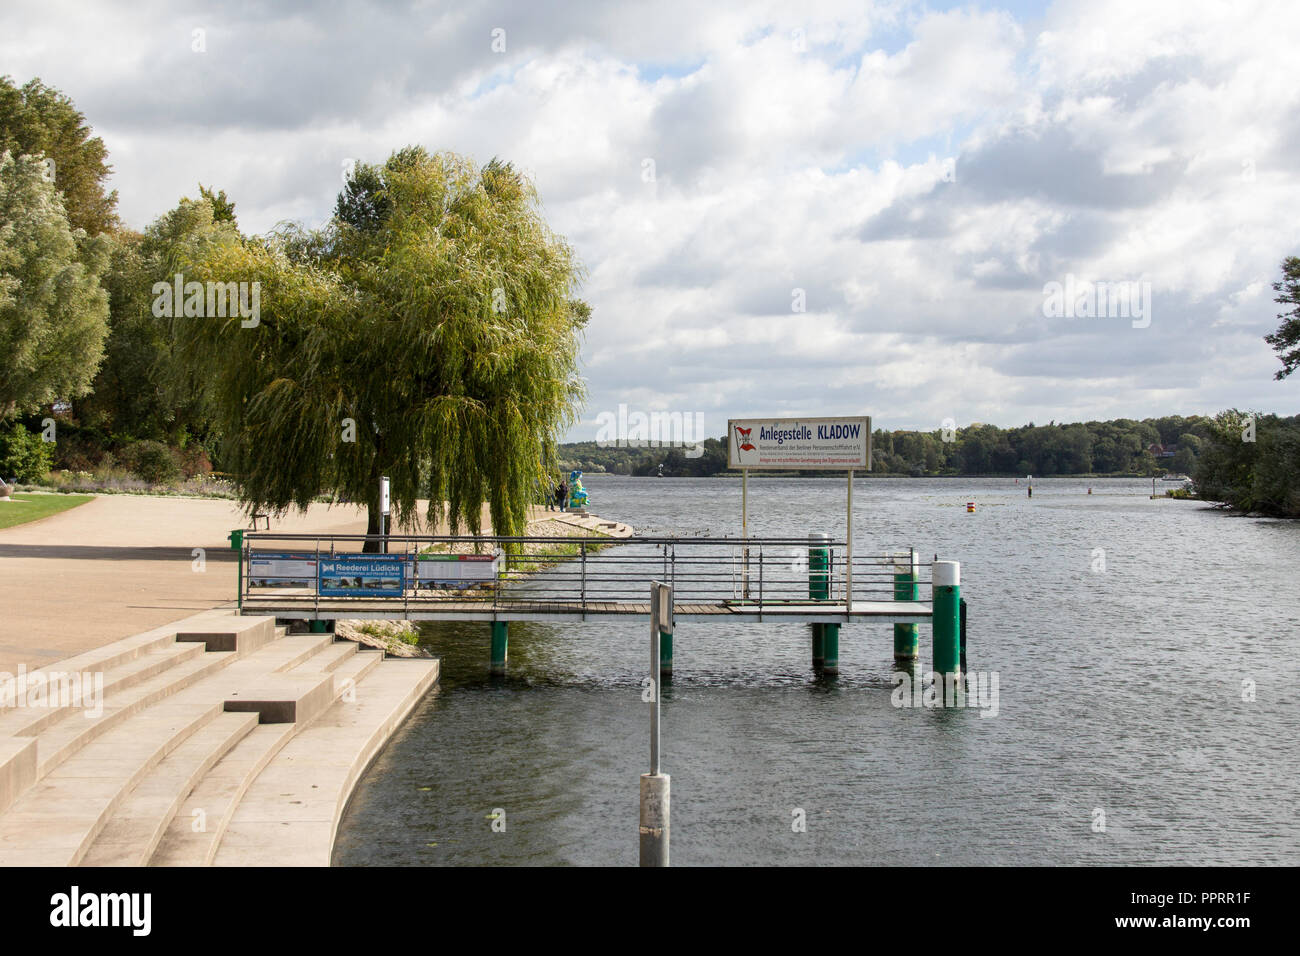 Landing Stage at Kladow Stock Photo